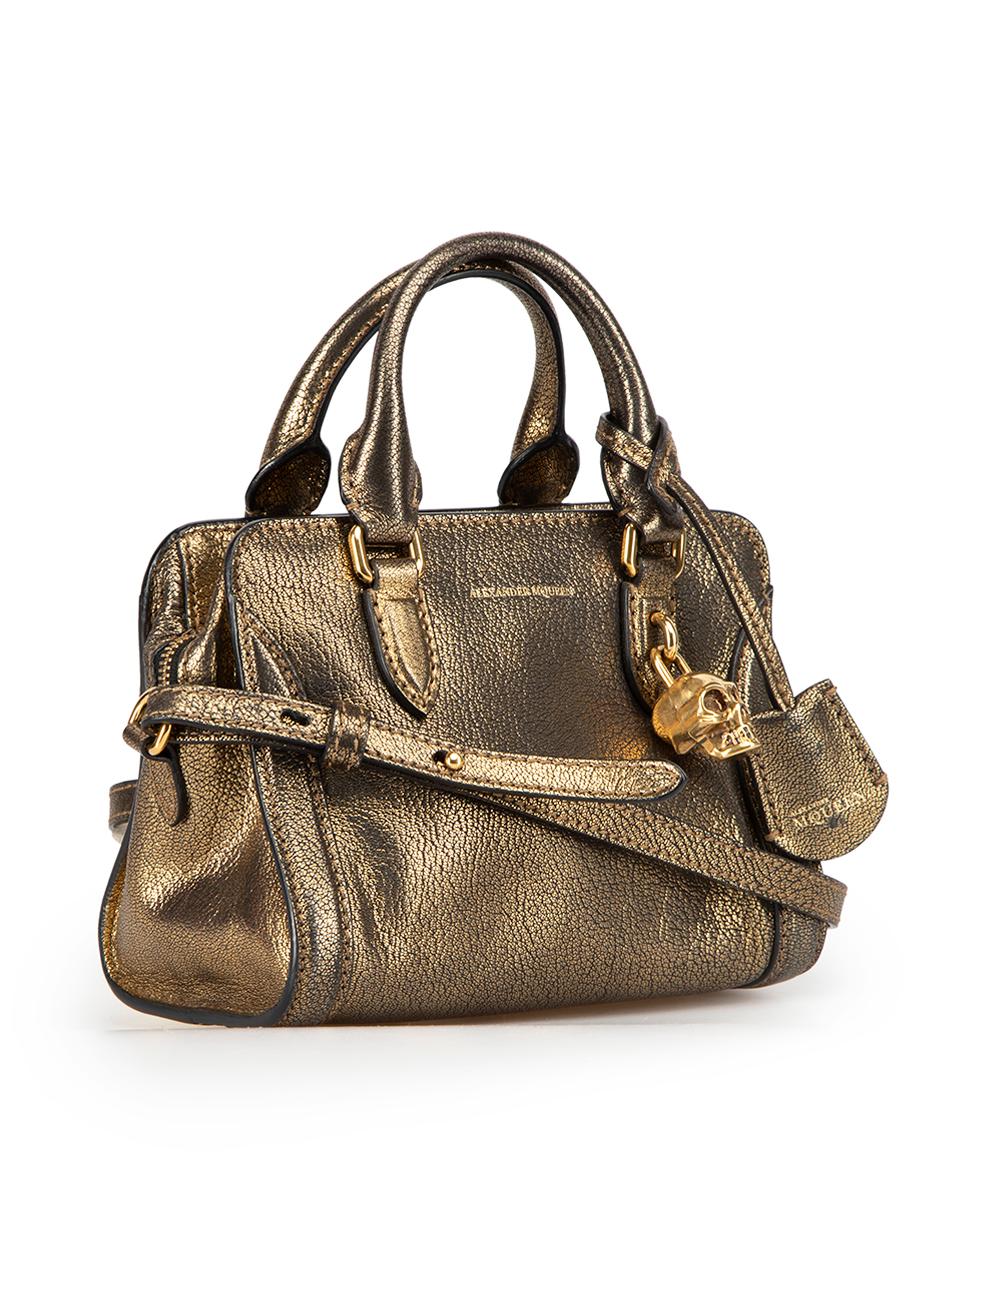 CONDITION is Very good. Minimal wear to bag is evident. Minimal wear to the base and corners with very light scuffing on this used Alexander McQueen designer resale item.



Details


Gold

Leather

Mini bag

2x Rolled top handles

1x Adjustable and